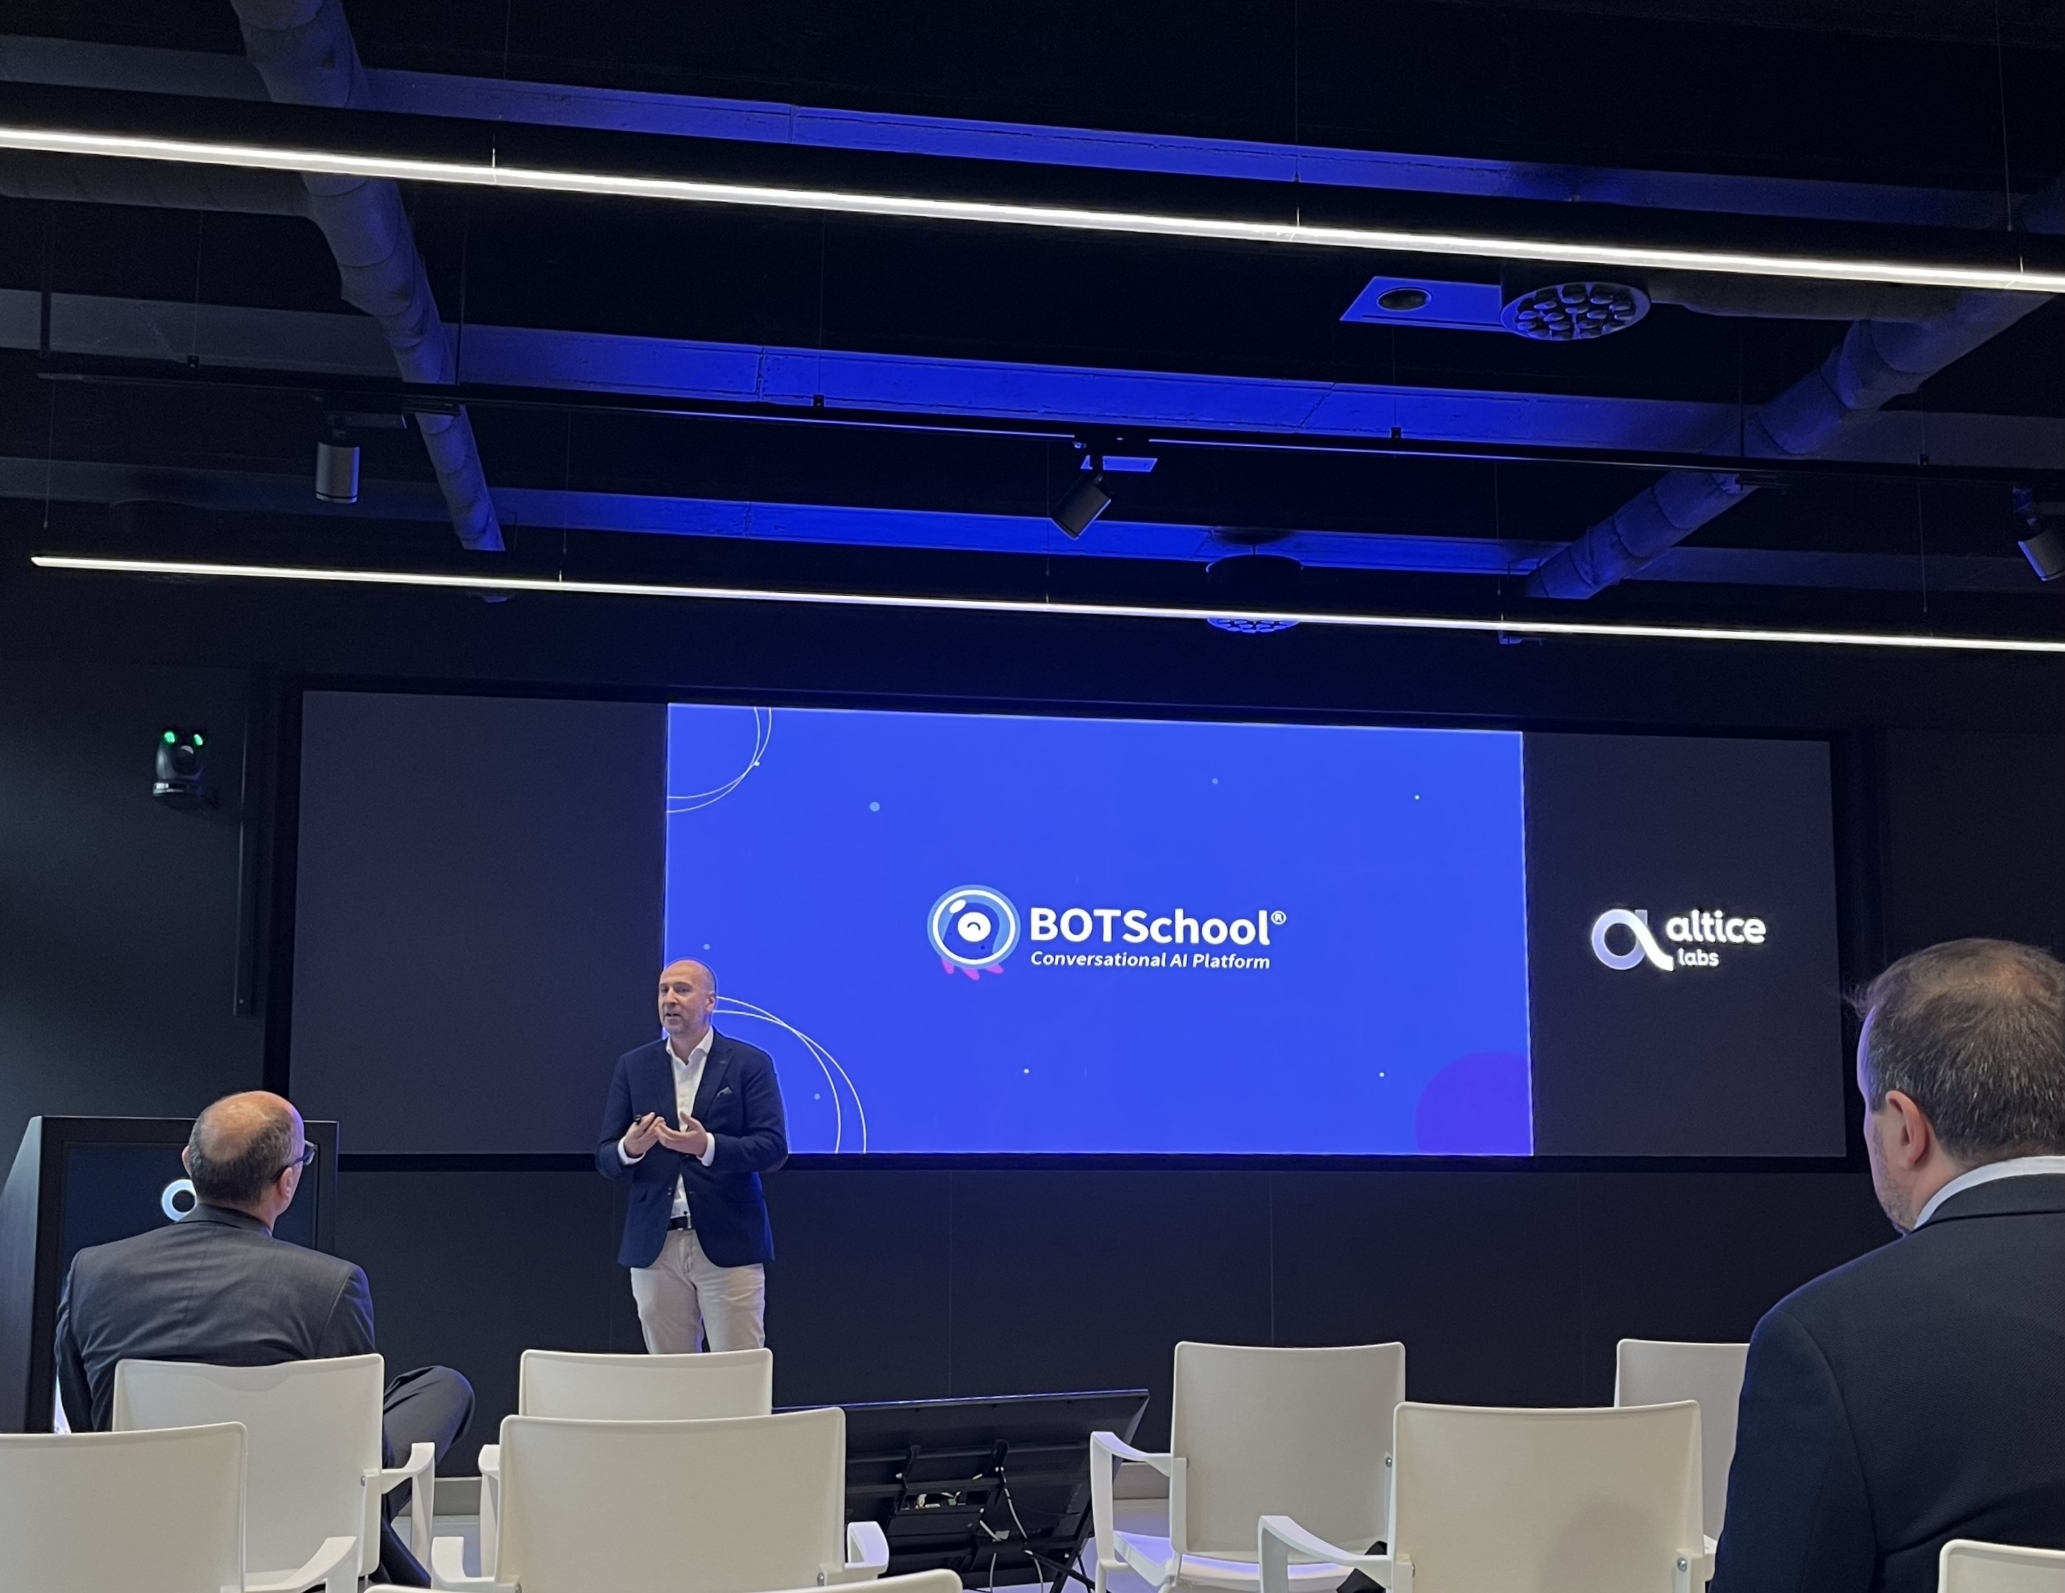 BOTSchool is present in Open AI Summit to highlight the Generative AI Capability